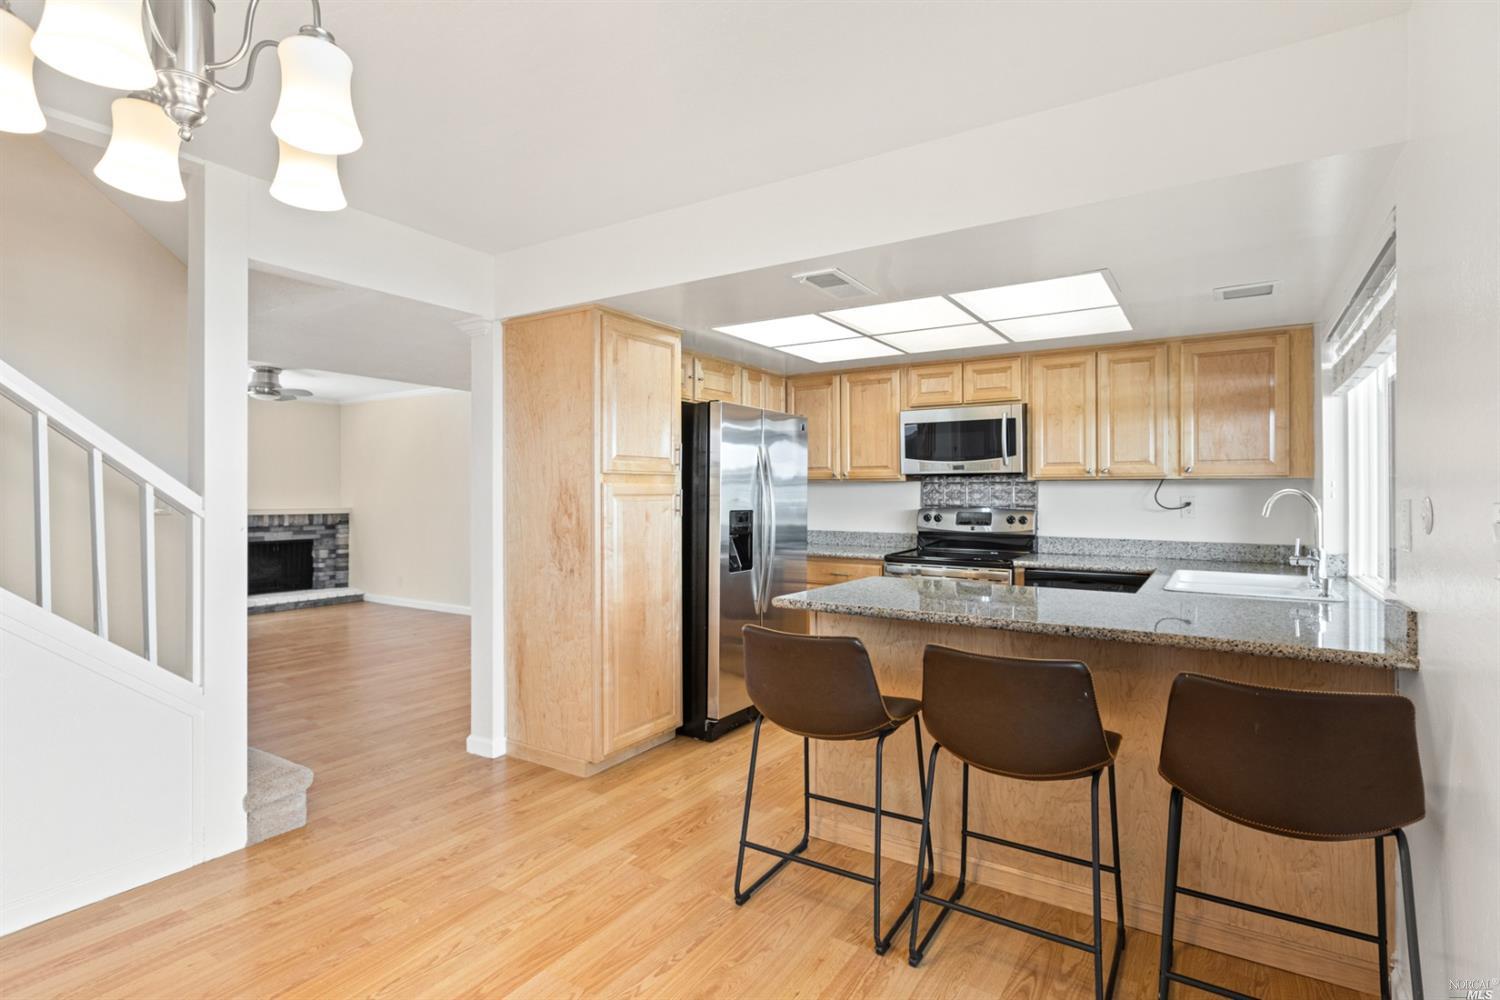 a kitchen with stainless steel appliances granite countertop a stove top oven a refrigerator a sink dishwasher and white cabinets with wooden floor